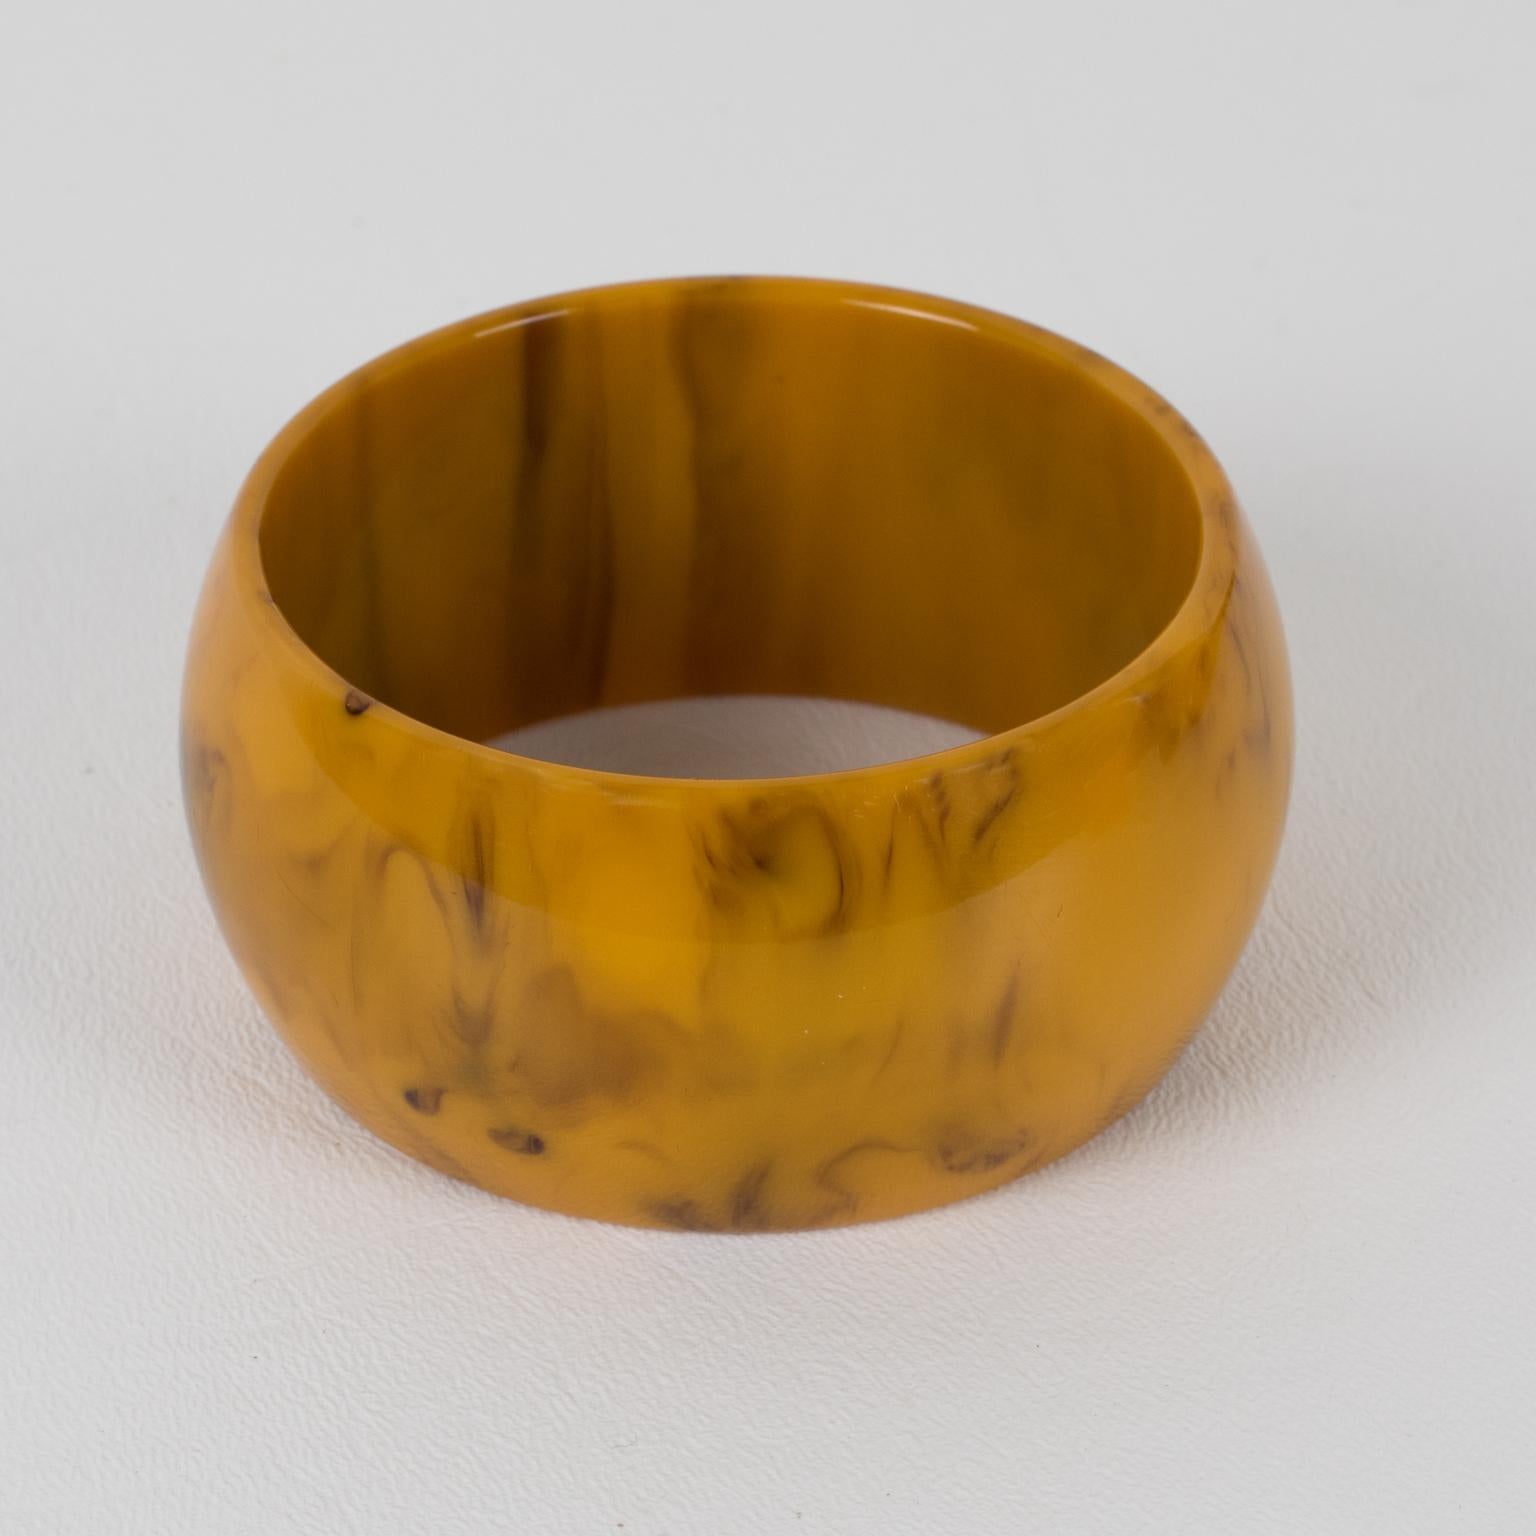 Superb butterscotch and black marble Bakelite bracelet bangle. Oversized wide domed shape. Intense butterscotch color with cloudy black swirling also called Mississippi Mud or Swamp color. 
Measurements: Inside across is 2.57 in. diameter (6.5 cm) -